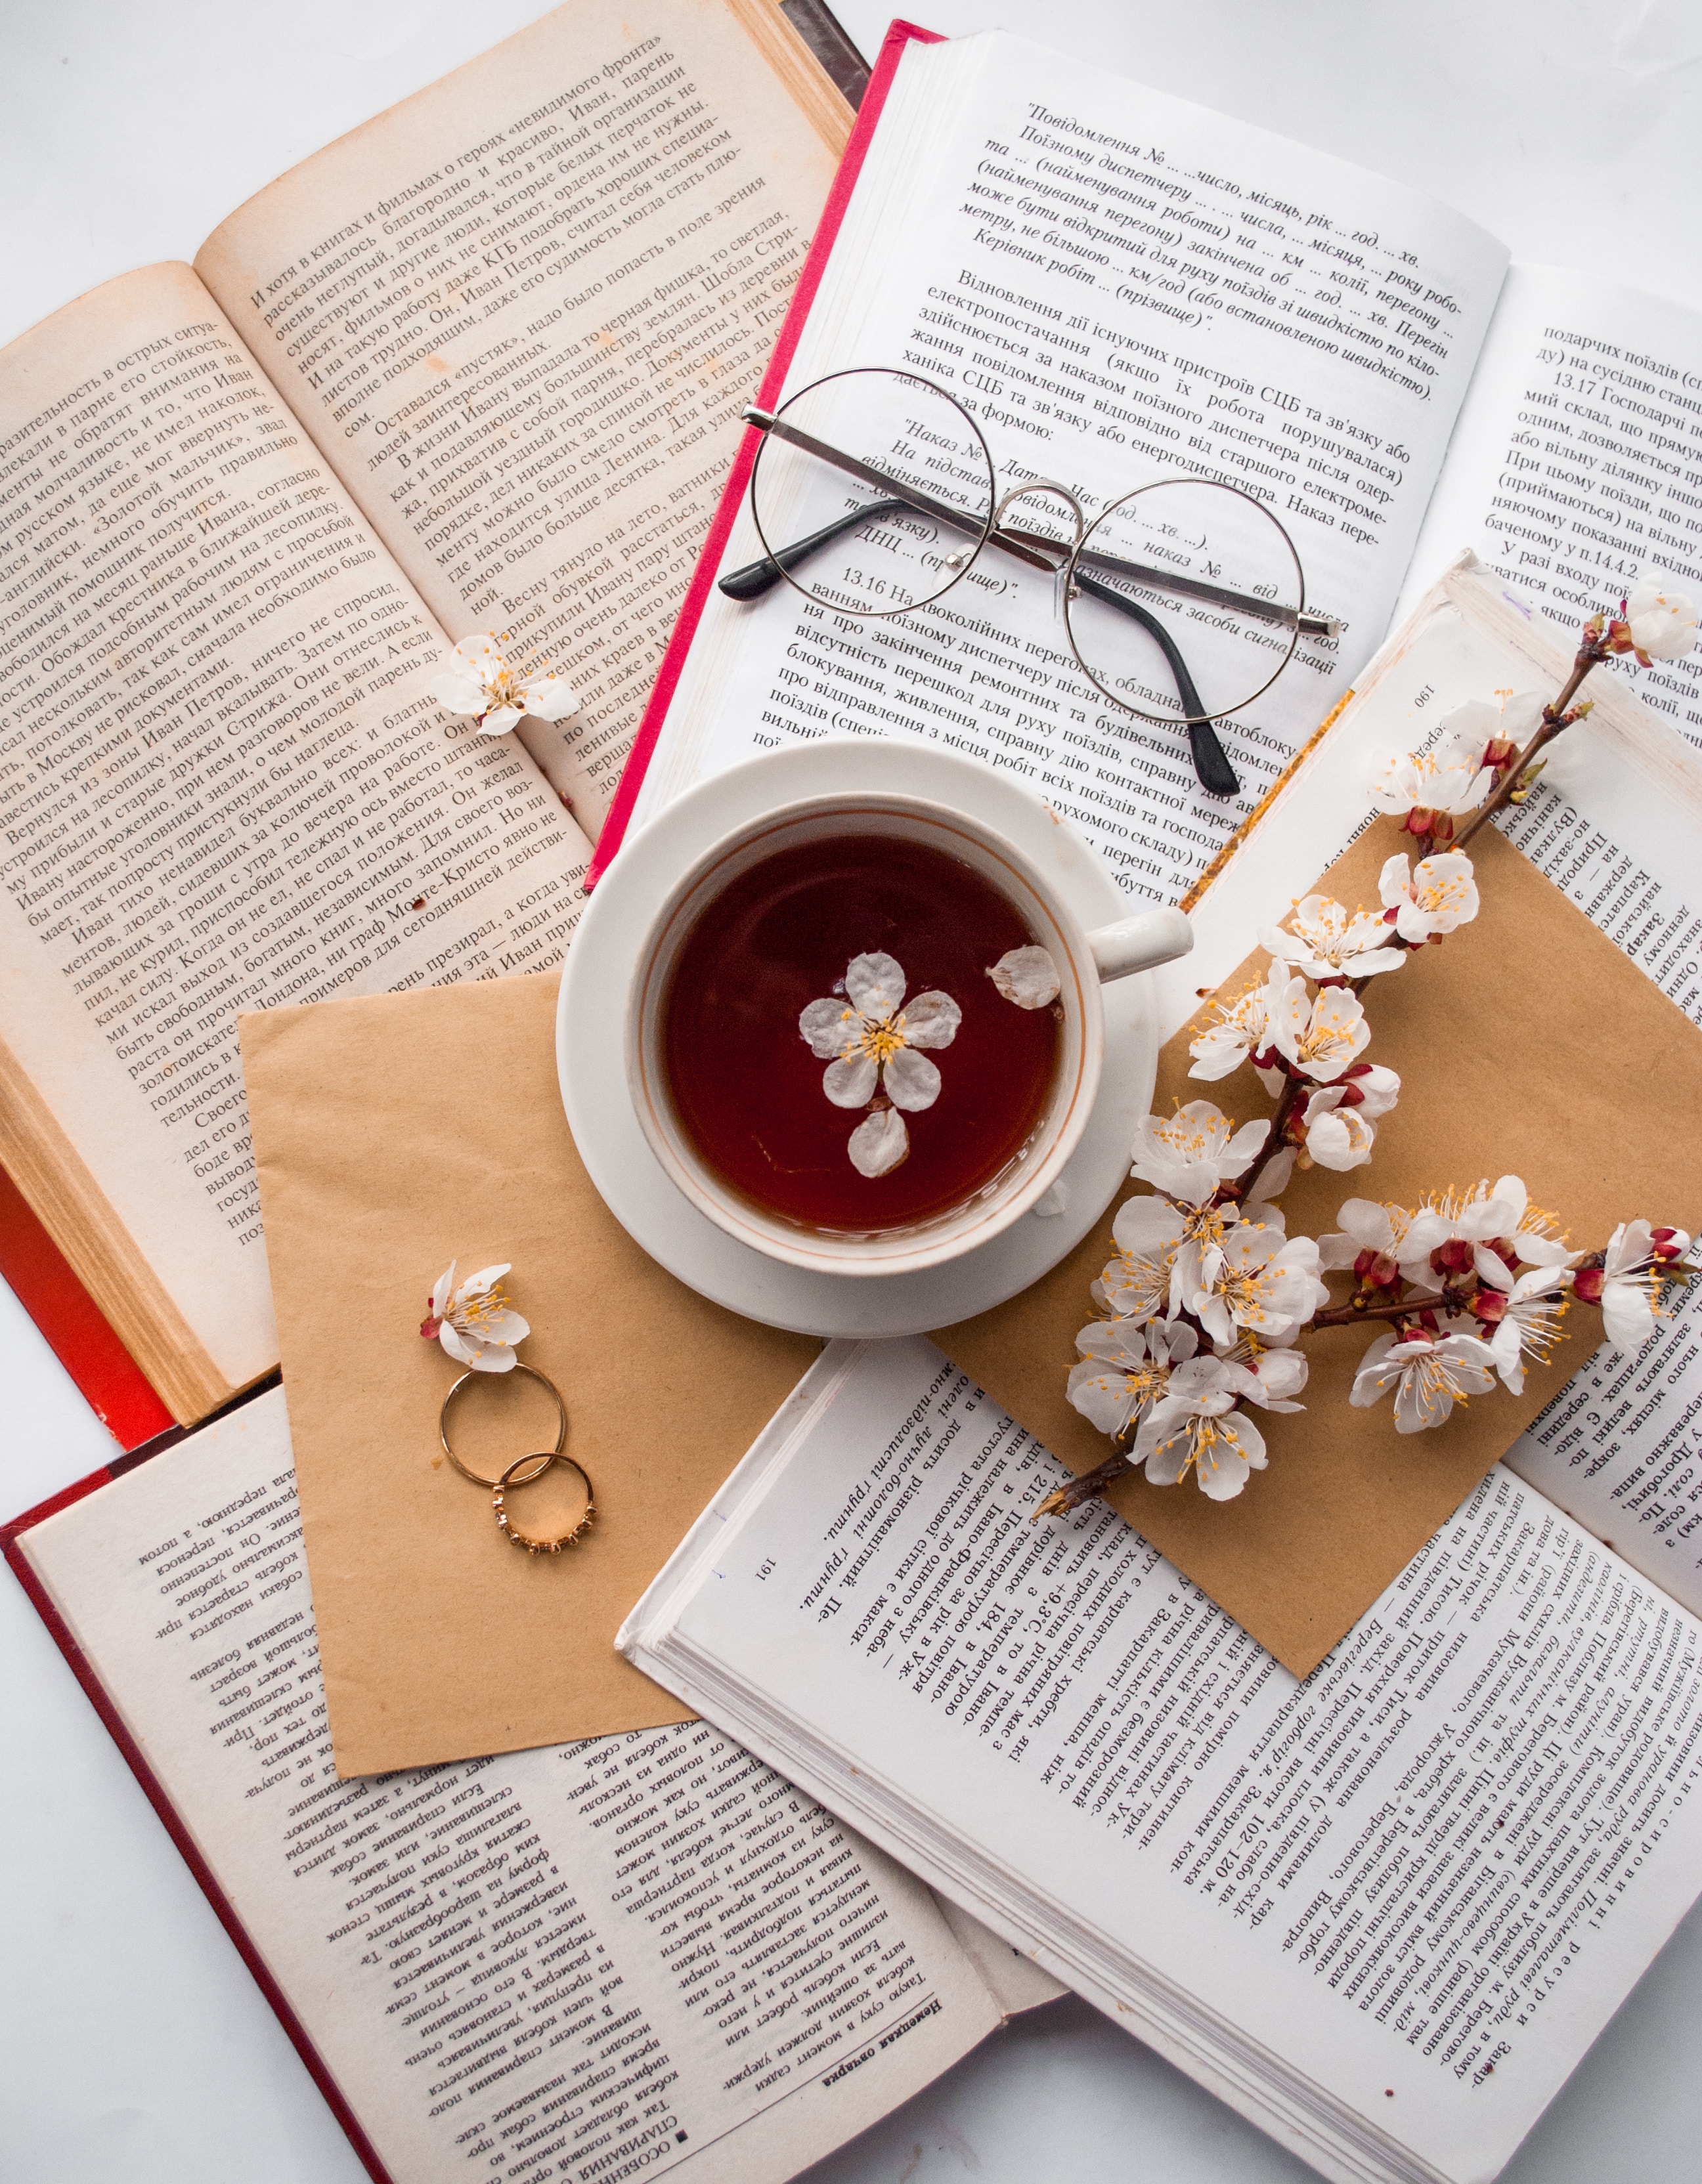 books, flowers, rings, miscellanea, miscellaneous, cup, glasses, spectacles 8K